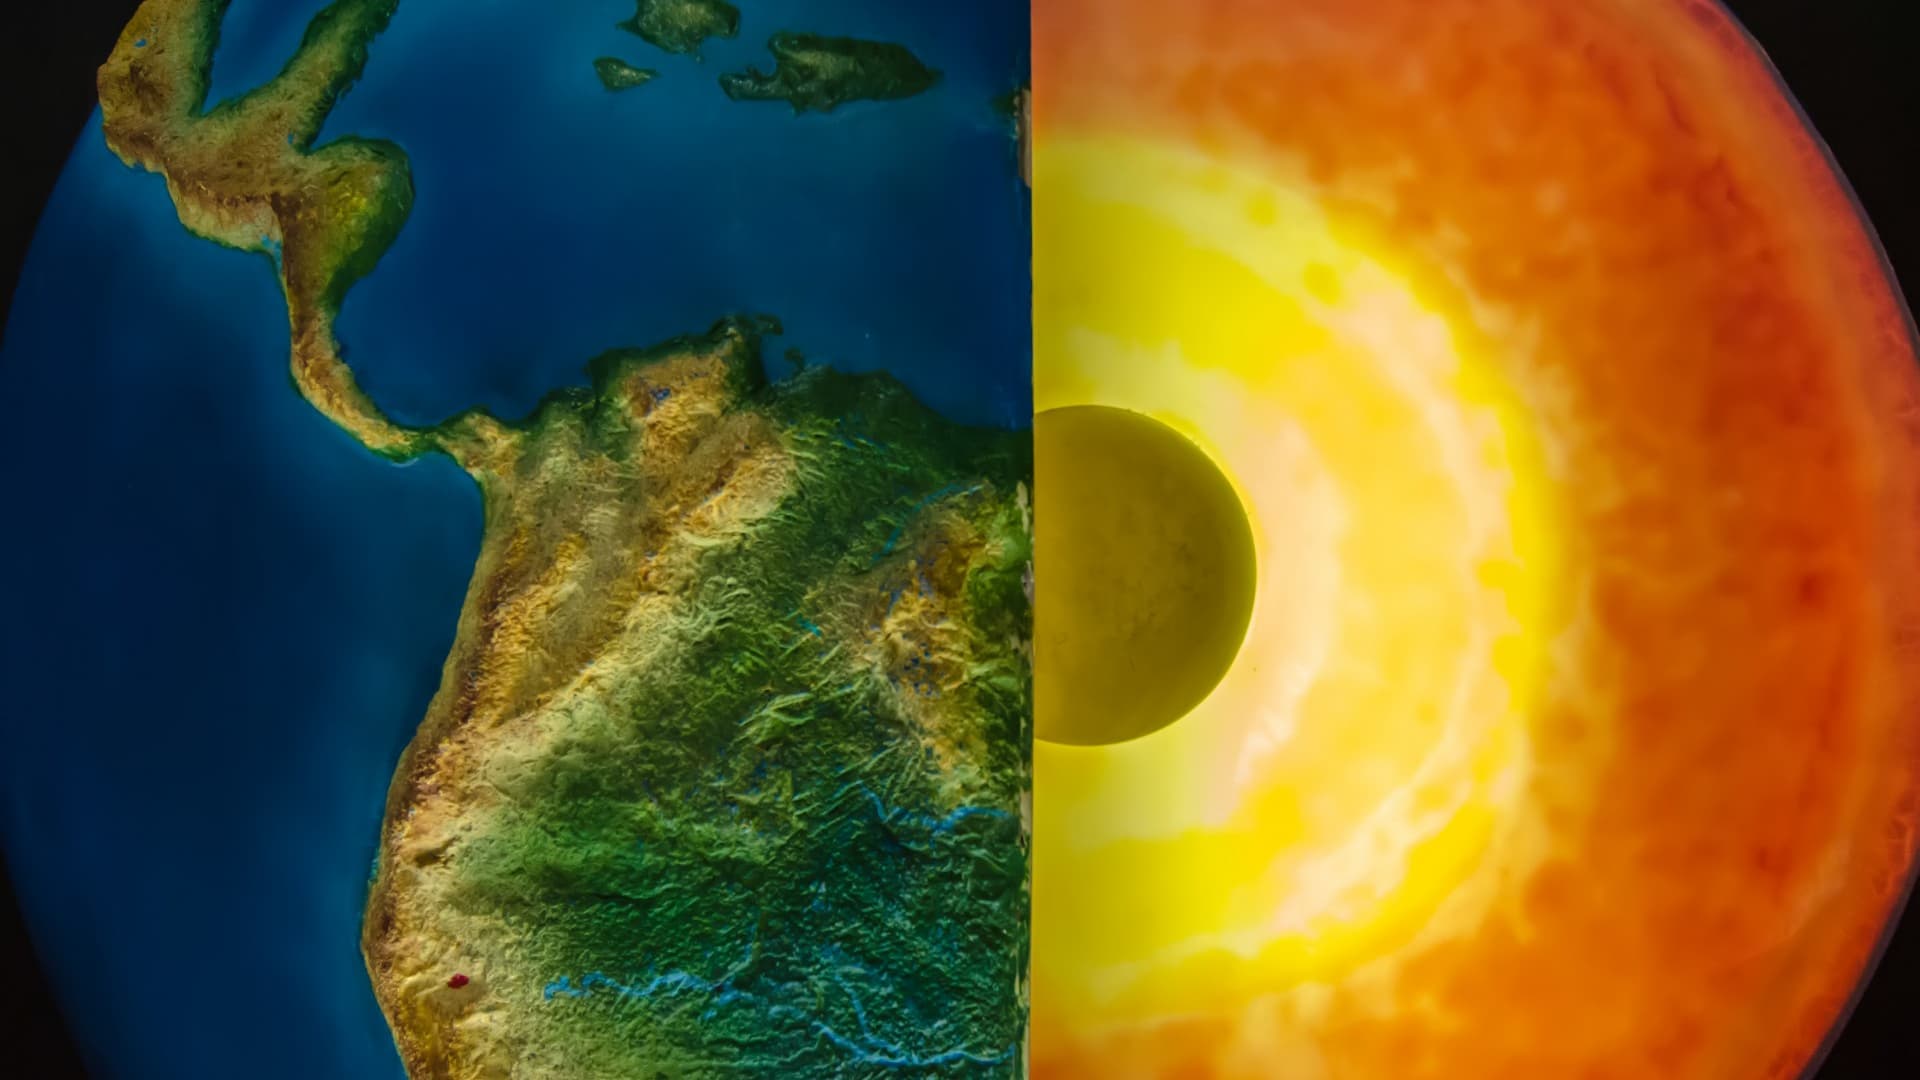 A study indicates that the inner core of the Earth is currently changing the direction of its rotation